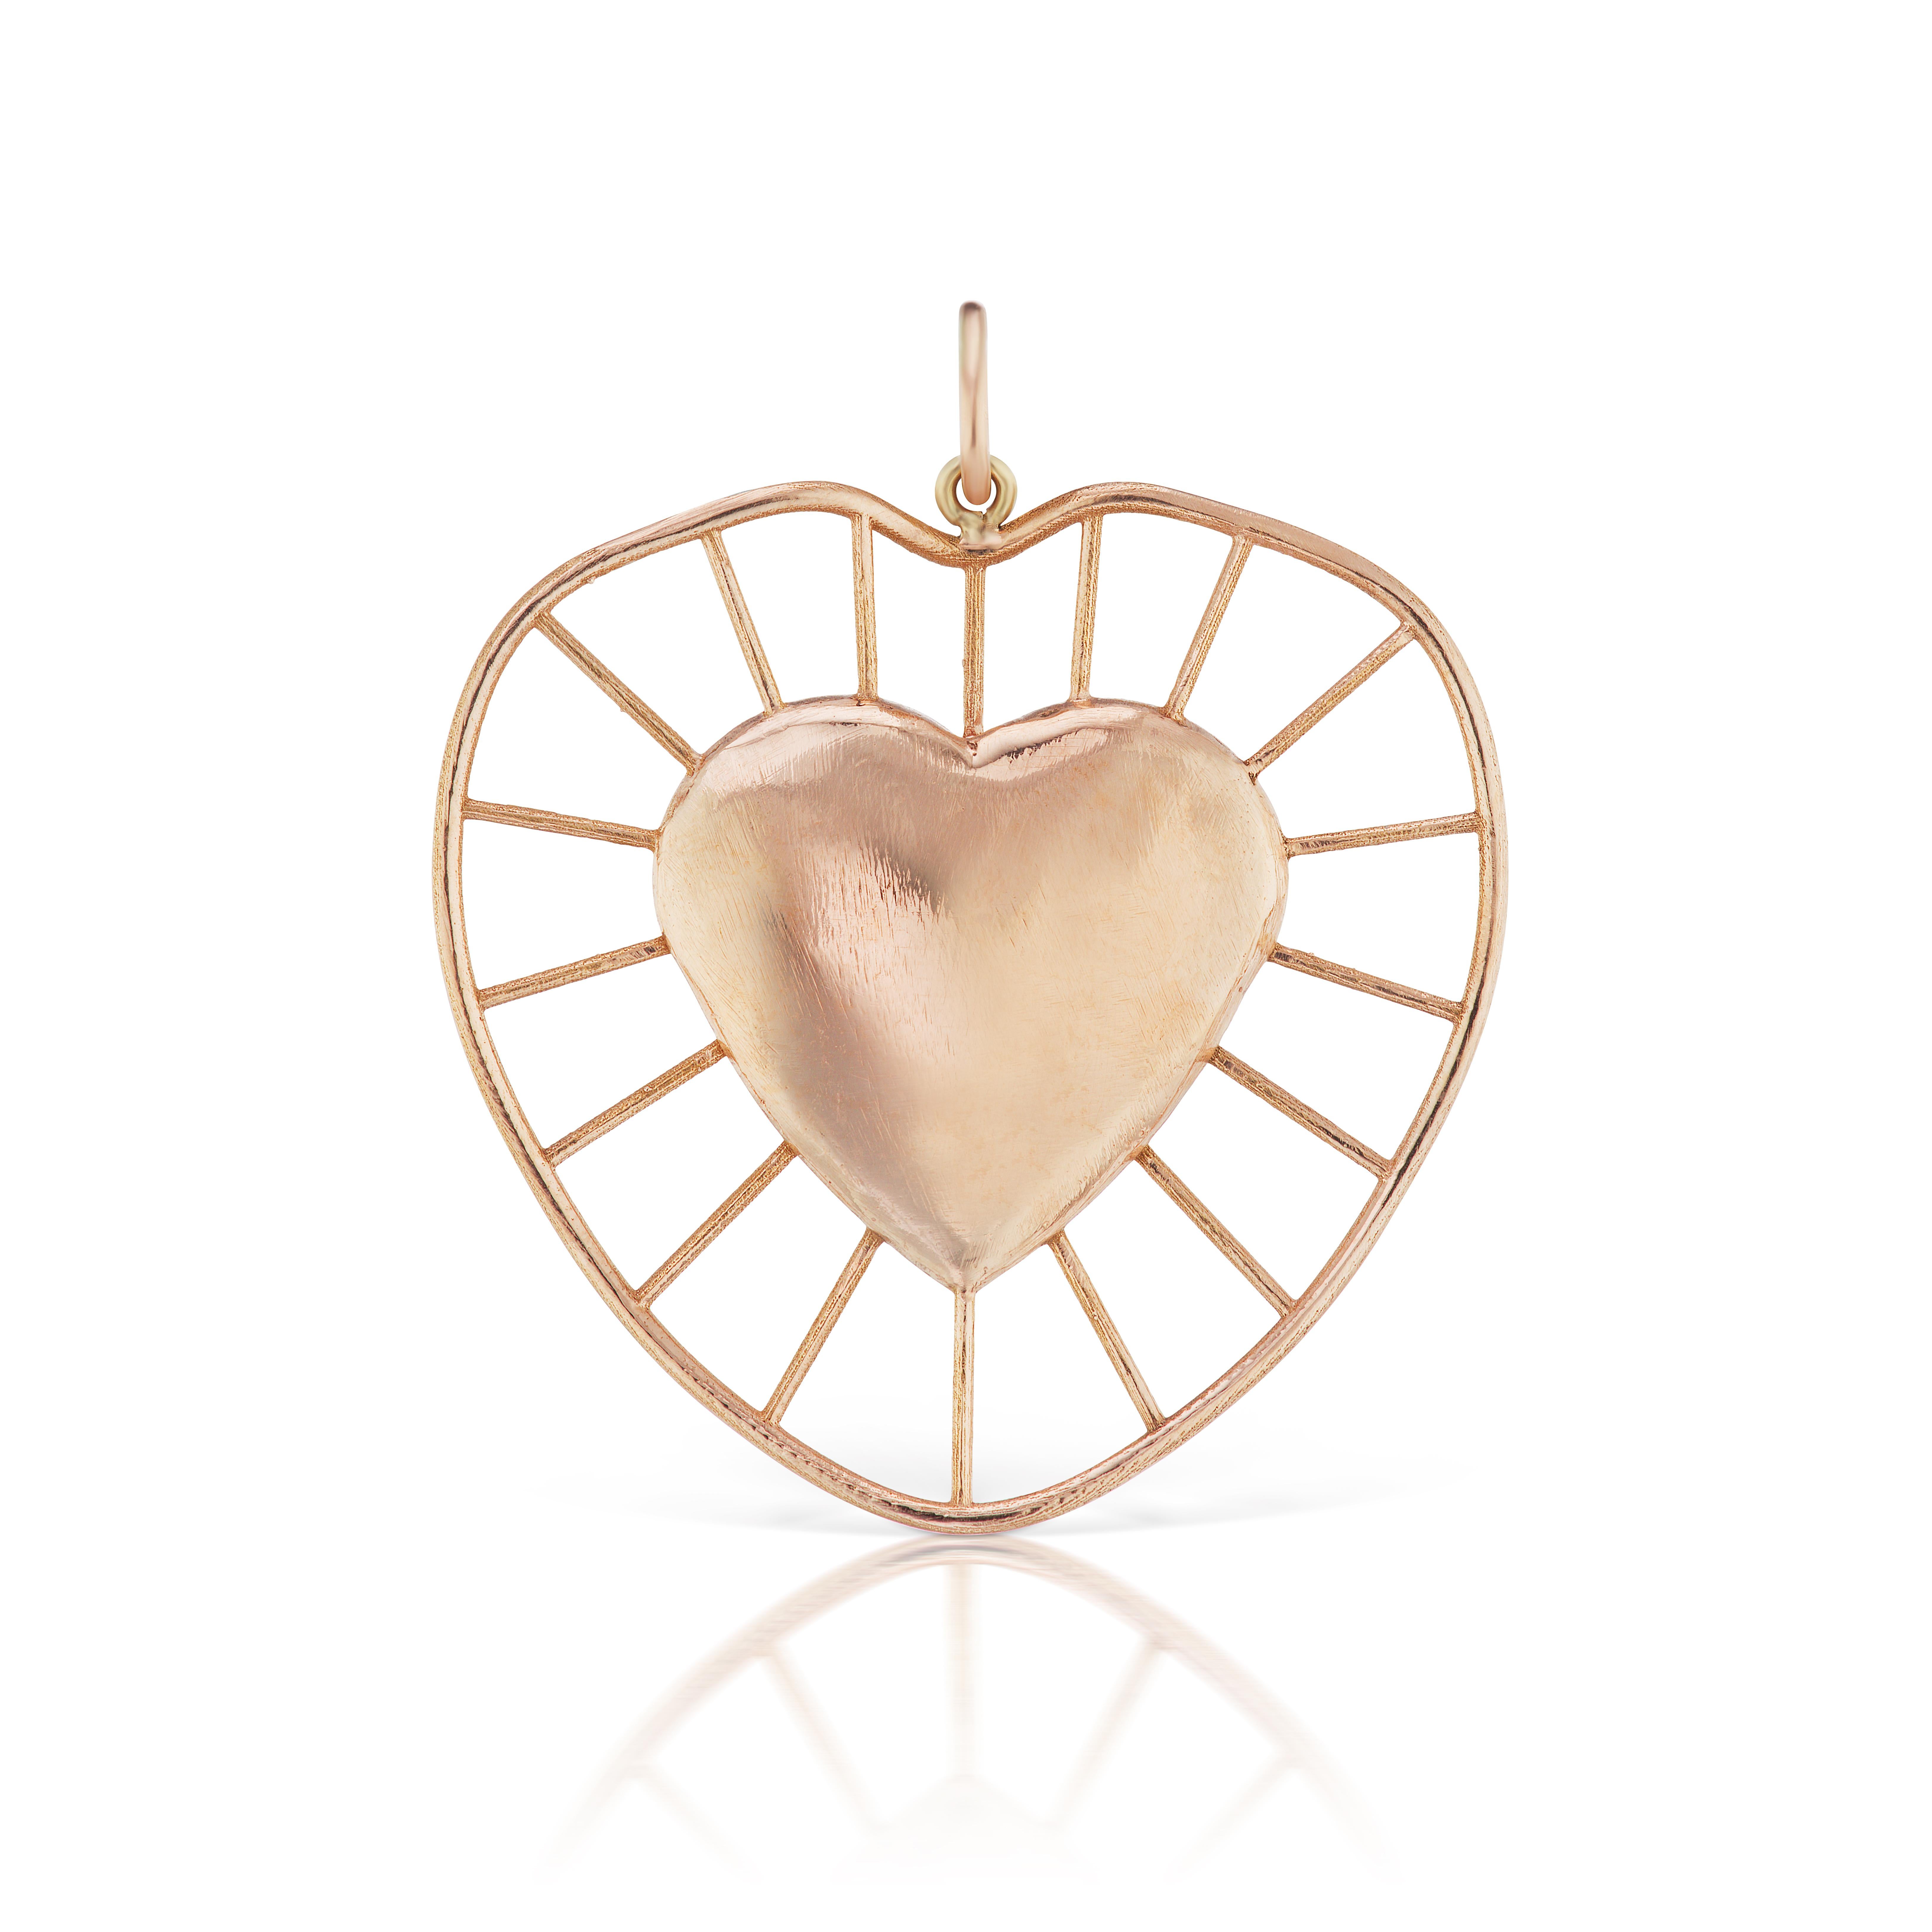 The Radial heart charm is designed by Christina Alexiou. 
This modern beautiful charm is crafted with 18k yellow gold and made in Greece.  
The heart is hollow, thus makes it a light-weight everyday piece of jewelry. 
It is available in two colours,